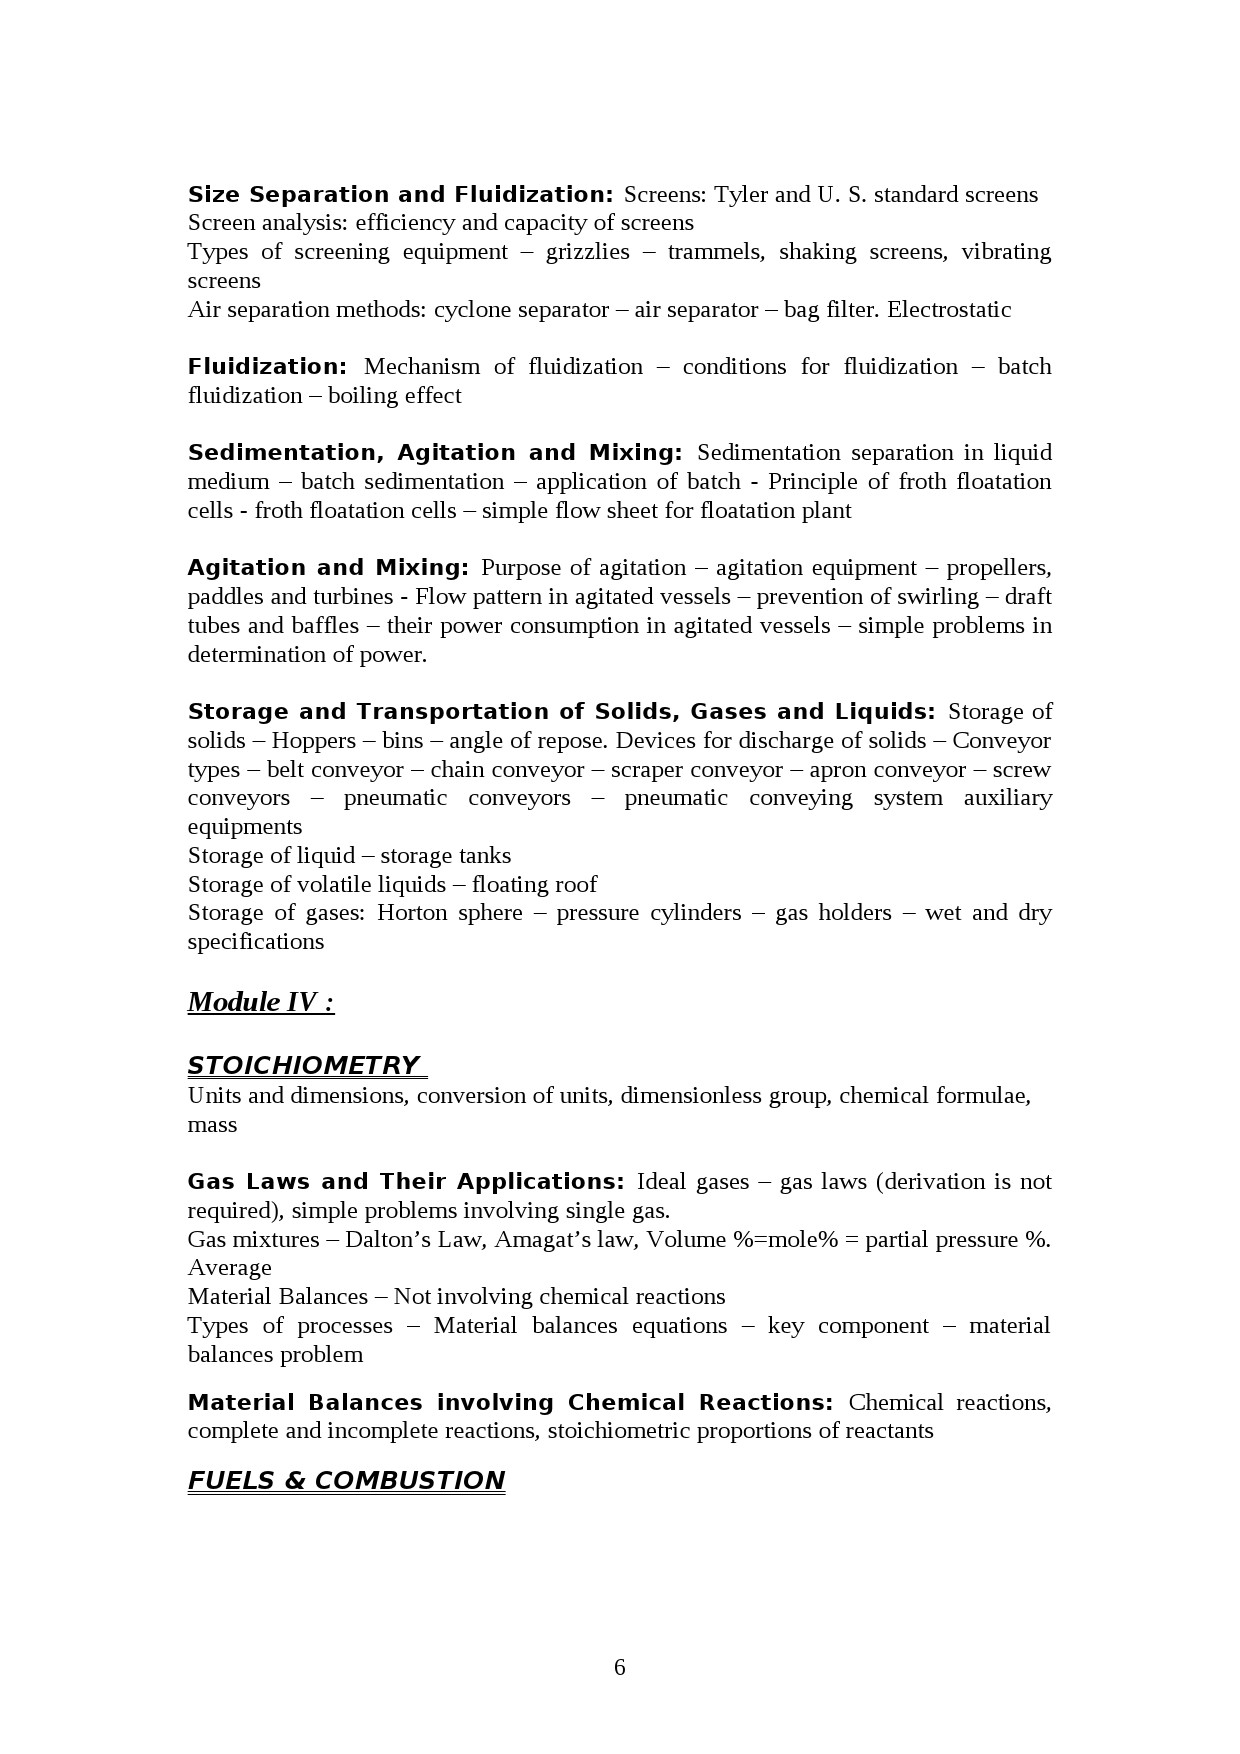 Chemical Engineering Lecturer in Polytechnic Exam Syllabus - Notification Image 6